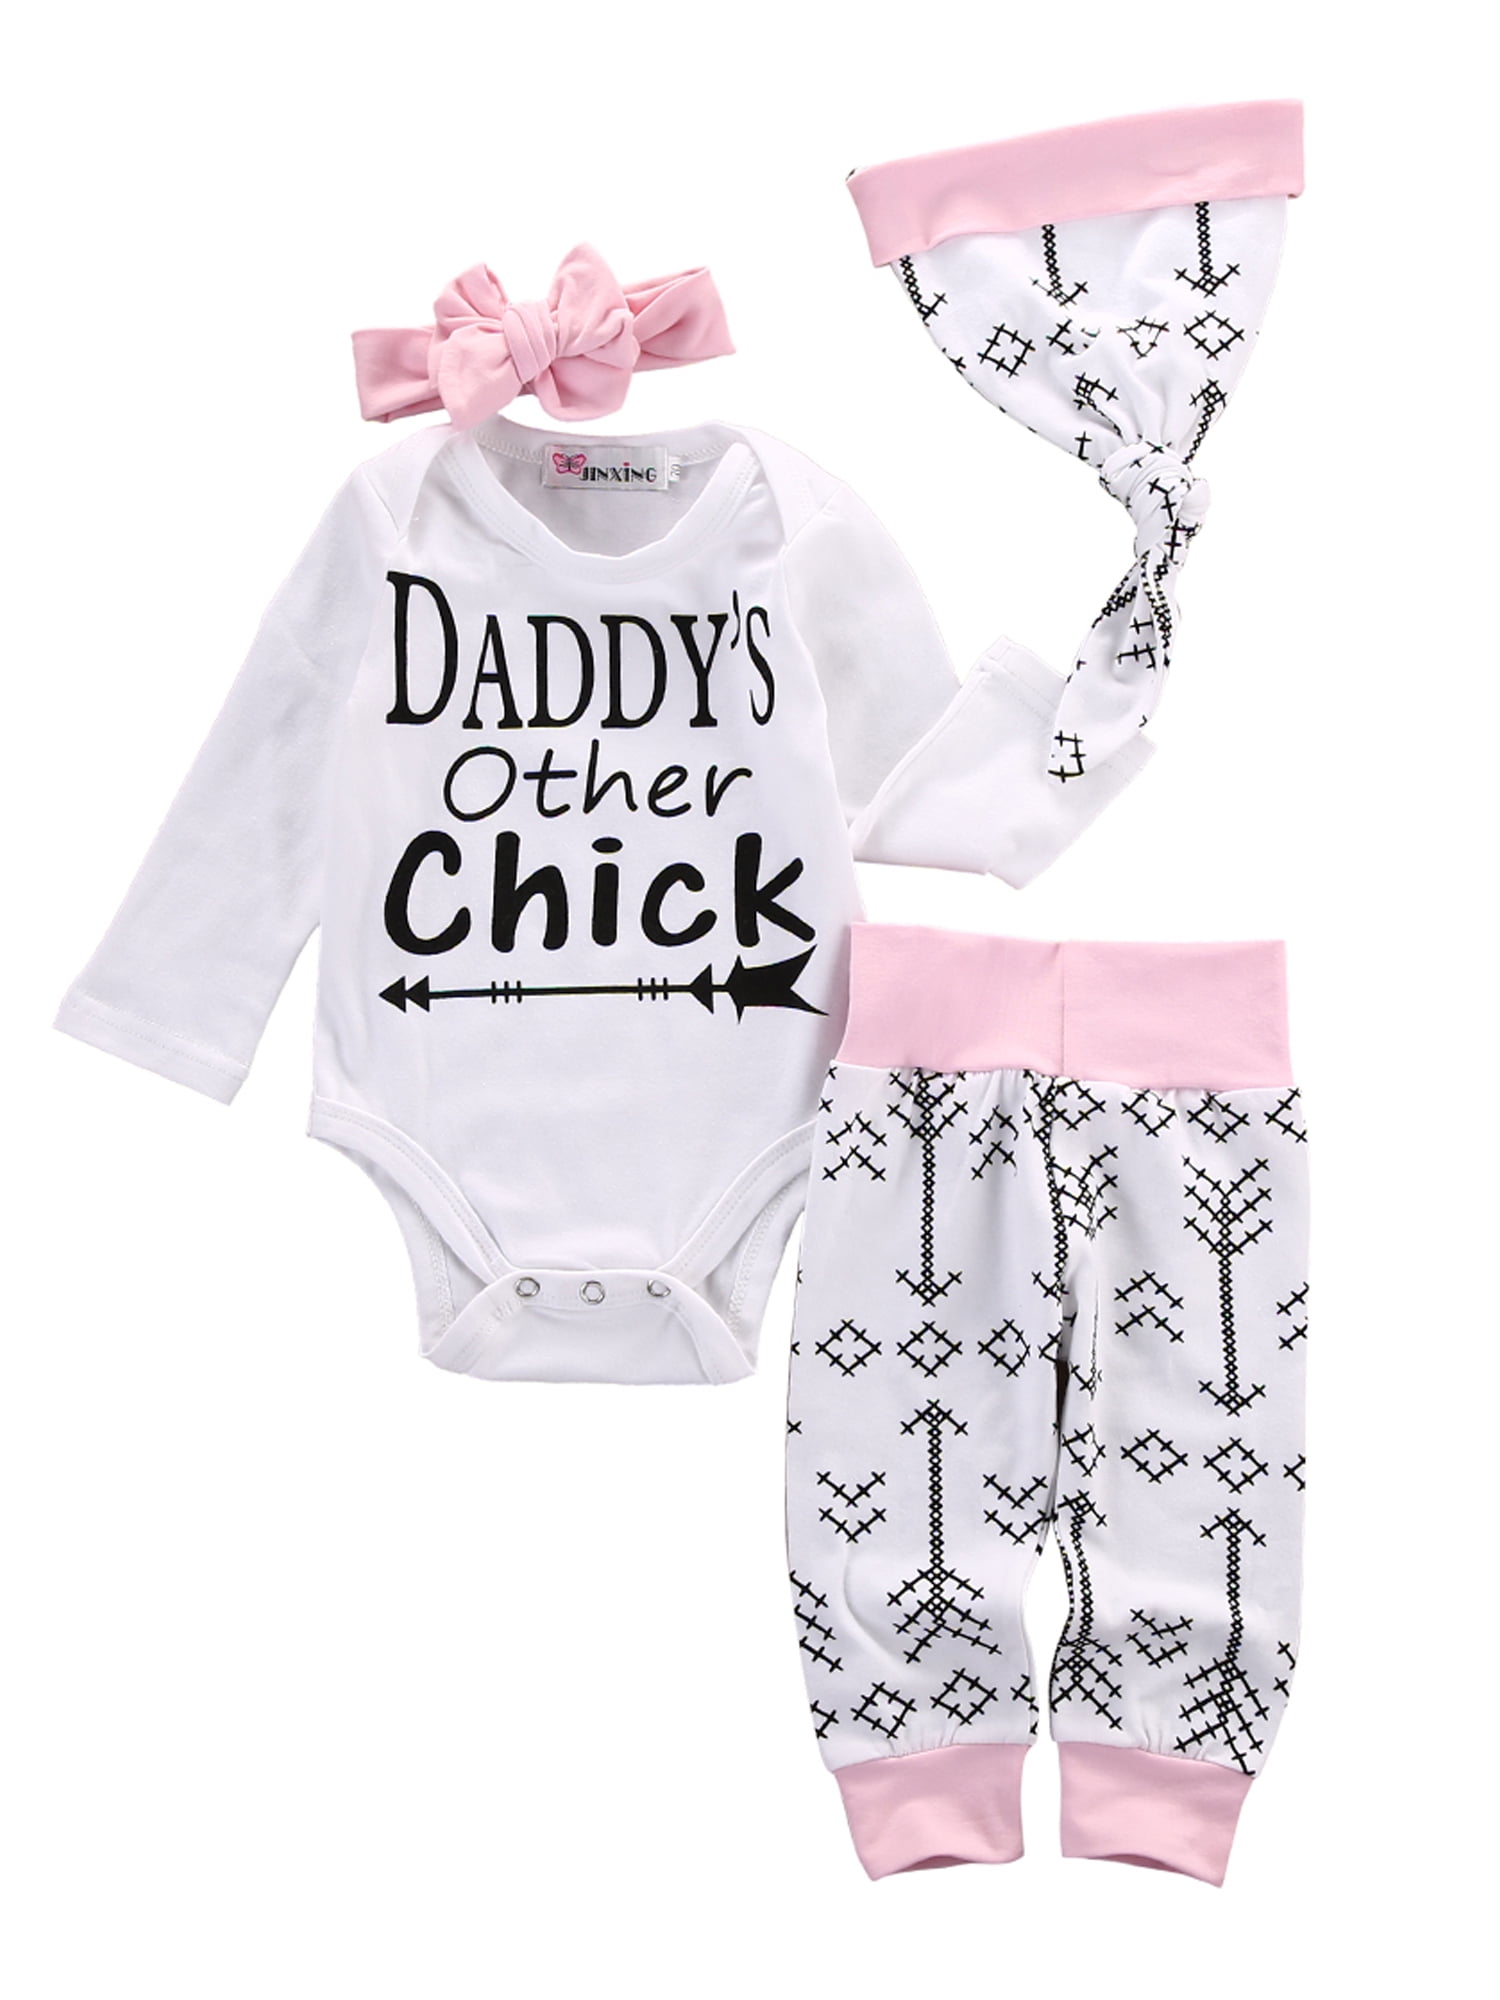 Musuos - Newborn Girls Clothes Baby Romper Outfit Pants Set Long Sleeve ...